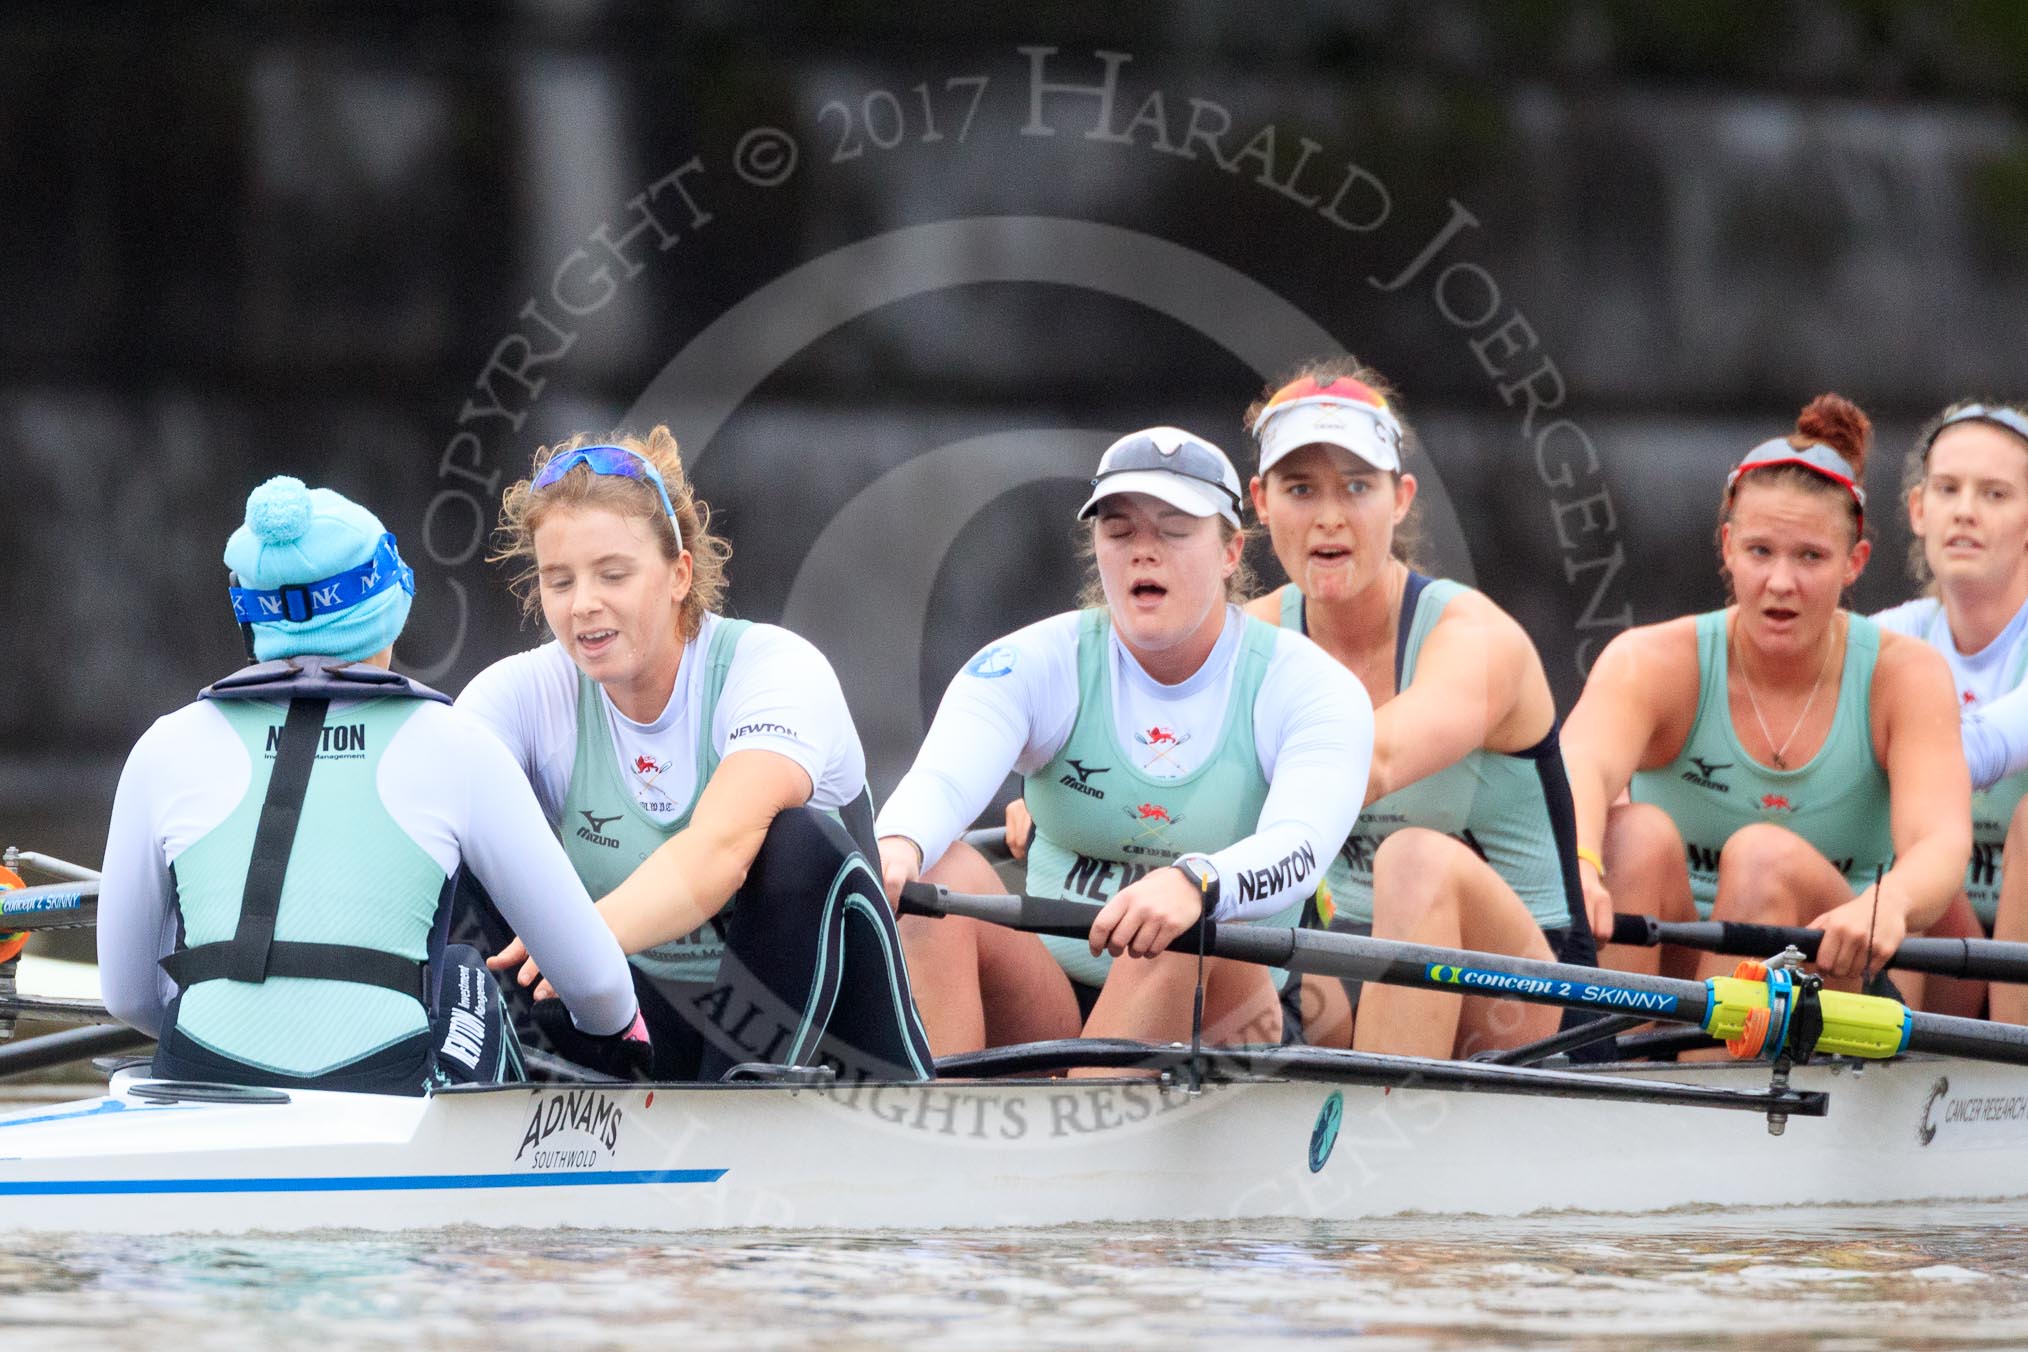 The Boat Race season 2018 - Women's Boat Race Trial Eights (CUWBC, Cambridge): Expecto Patronum just after crossing the finish line, and winning by two length: Cox-Sophie Shapter, stroke-Alice White,  7-Abigail Parker, 6-Thea Zabell, 5-Kelsey Barolak, 4-Laura Foster, 3-Sally O Brien.
River Thames between Putney Bridge and Mortlake,
London SW15,

United Kingdom,
on 05 December 2017 at 13:02, image #176